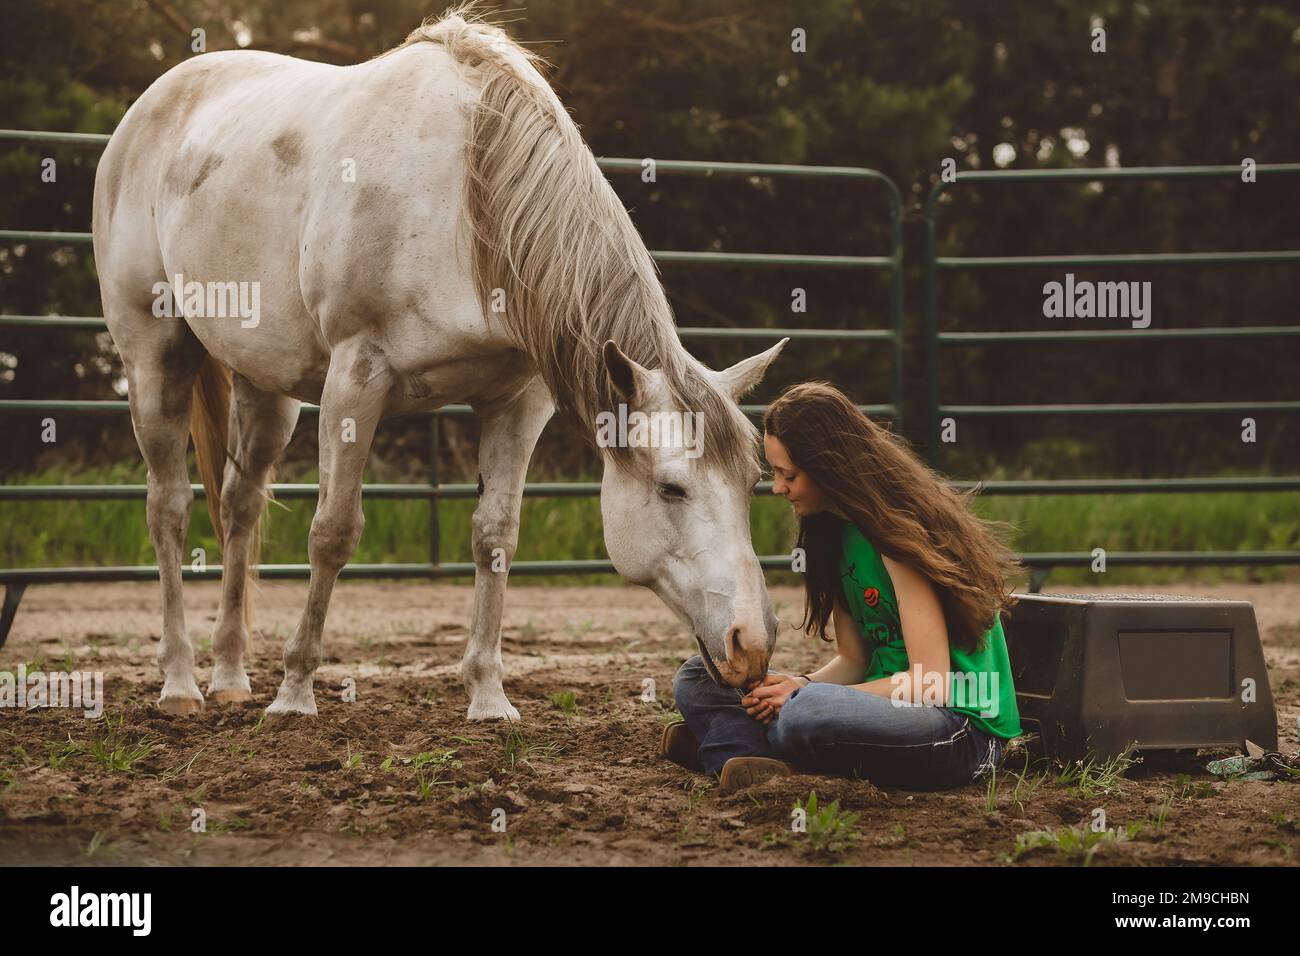 Horse gently touching young teen girls hand Stock Photo